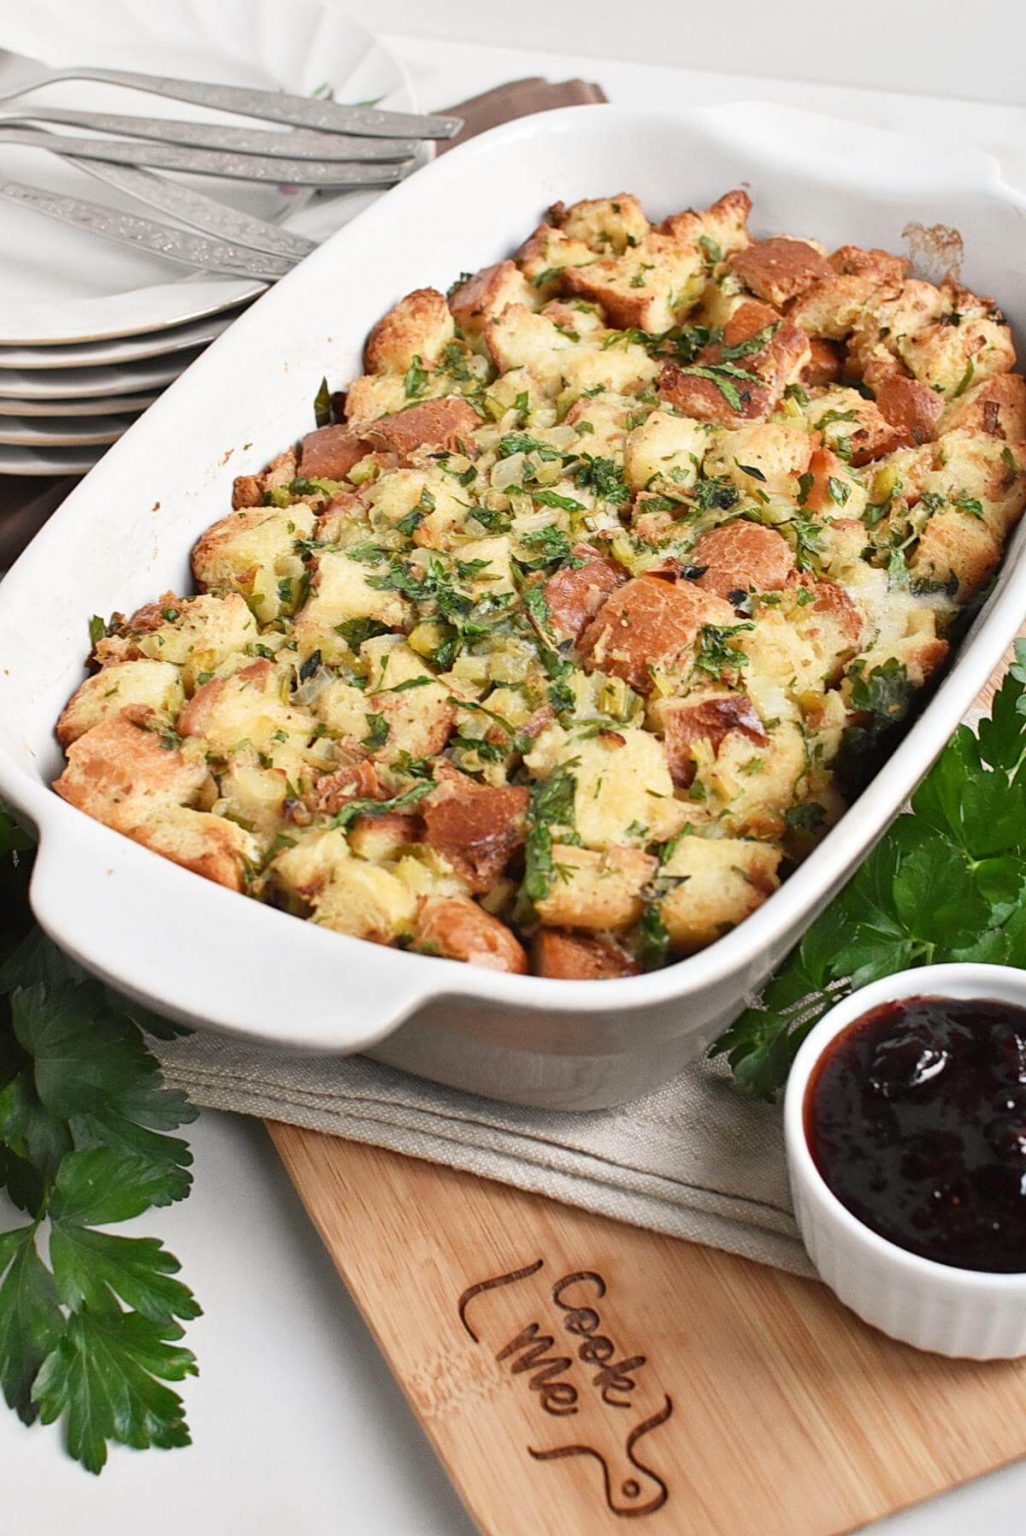 Classic Traditional Thanksgiving Stuffing Recipe - Cook.me Recipes